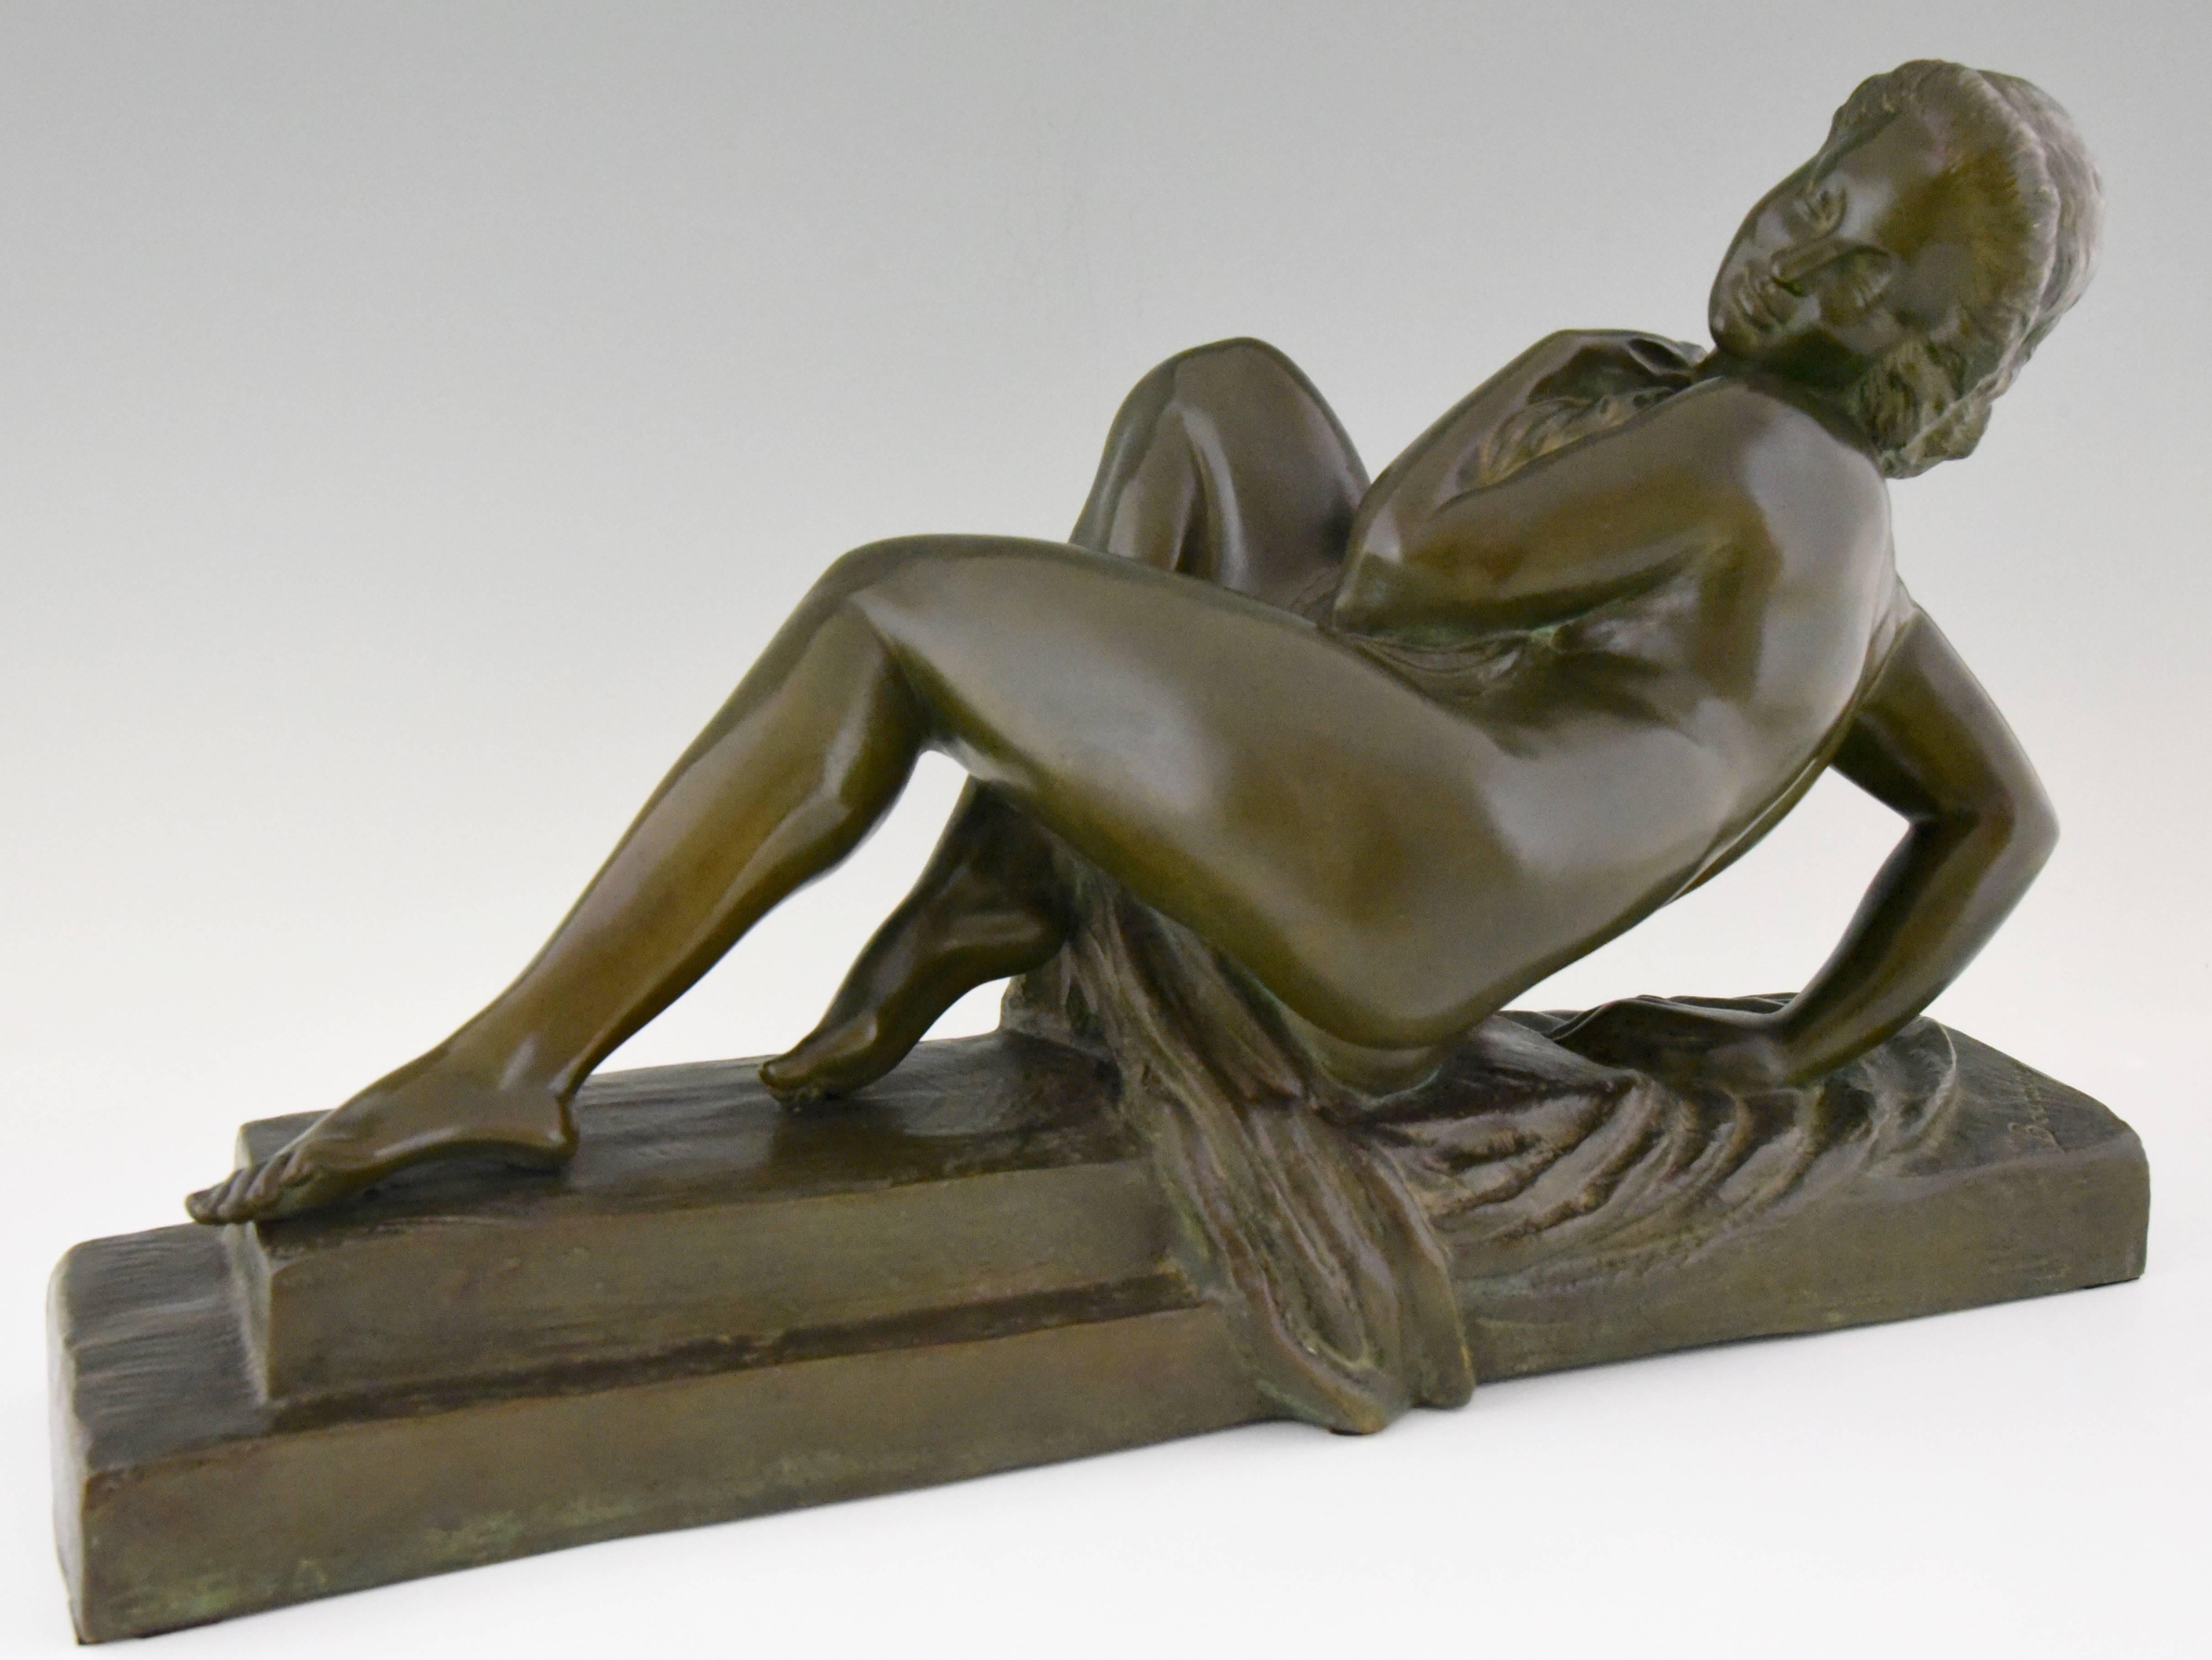 Hard to find bronze Art Deco sculpture of a bathing nude with drape by the famous French artist Marcel Andre Bouraine, 1886-1948. 

Artist/ maker: Marcel Bouraine
Signature/ marks: Bouraine.
Style: Art Deco
Date: 1930
Material: Bronze with